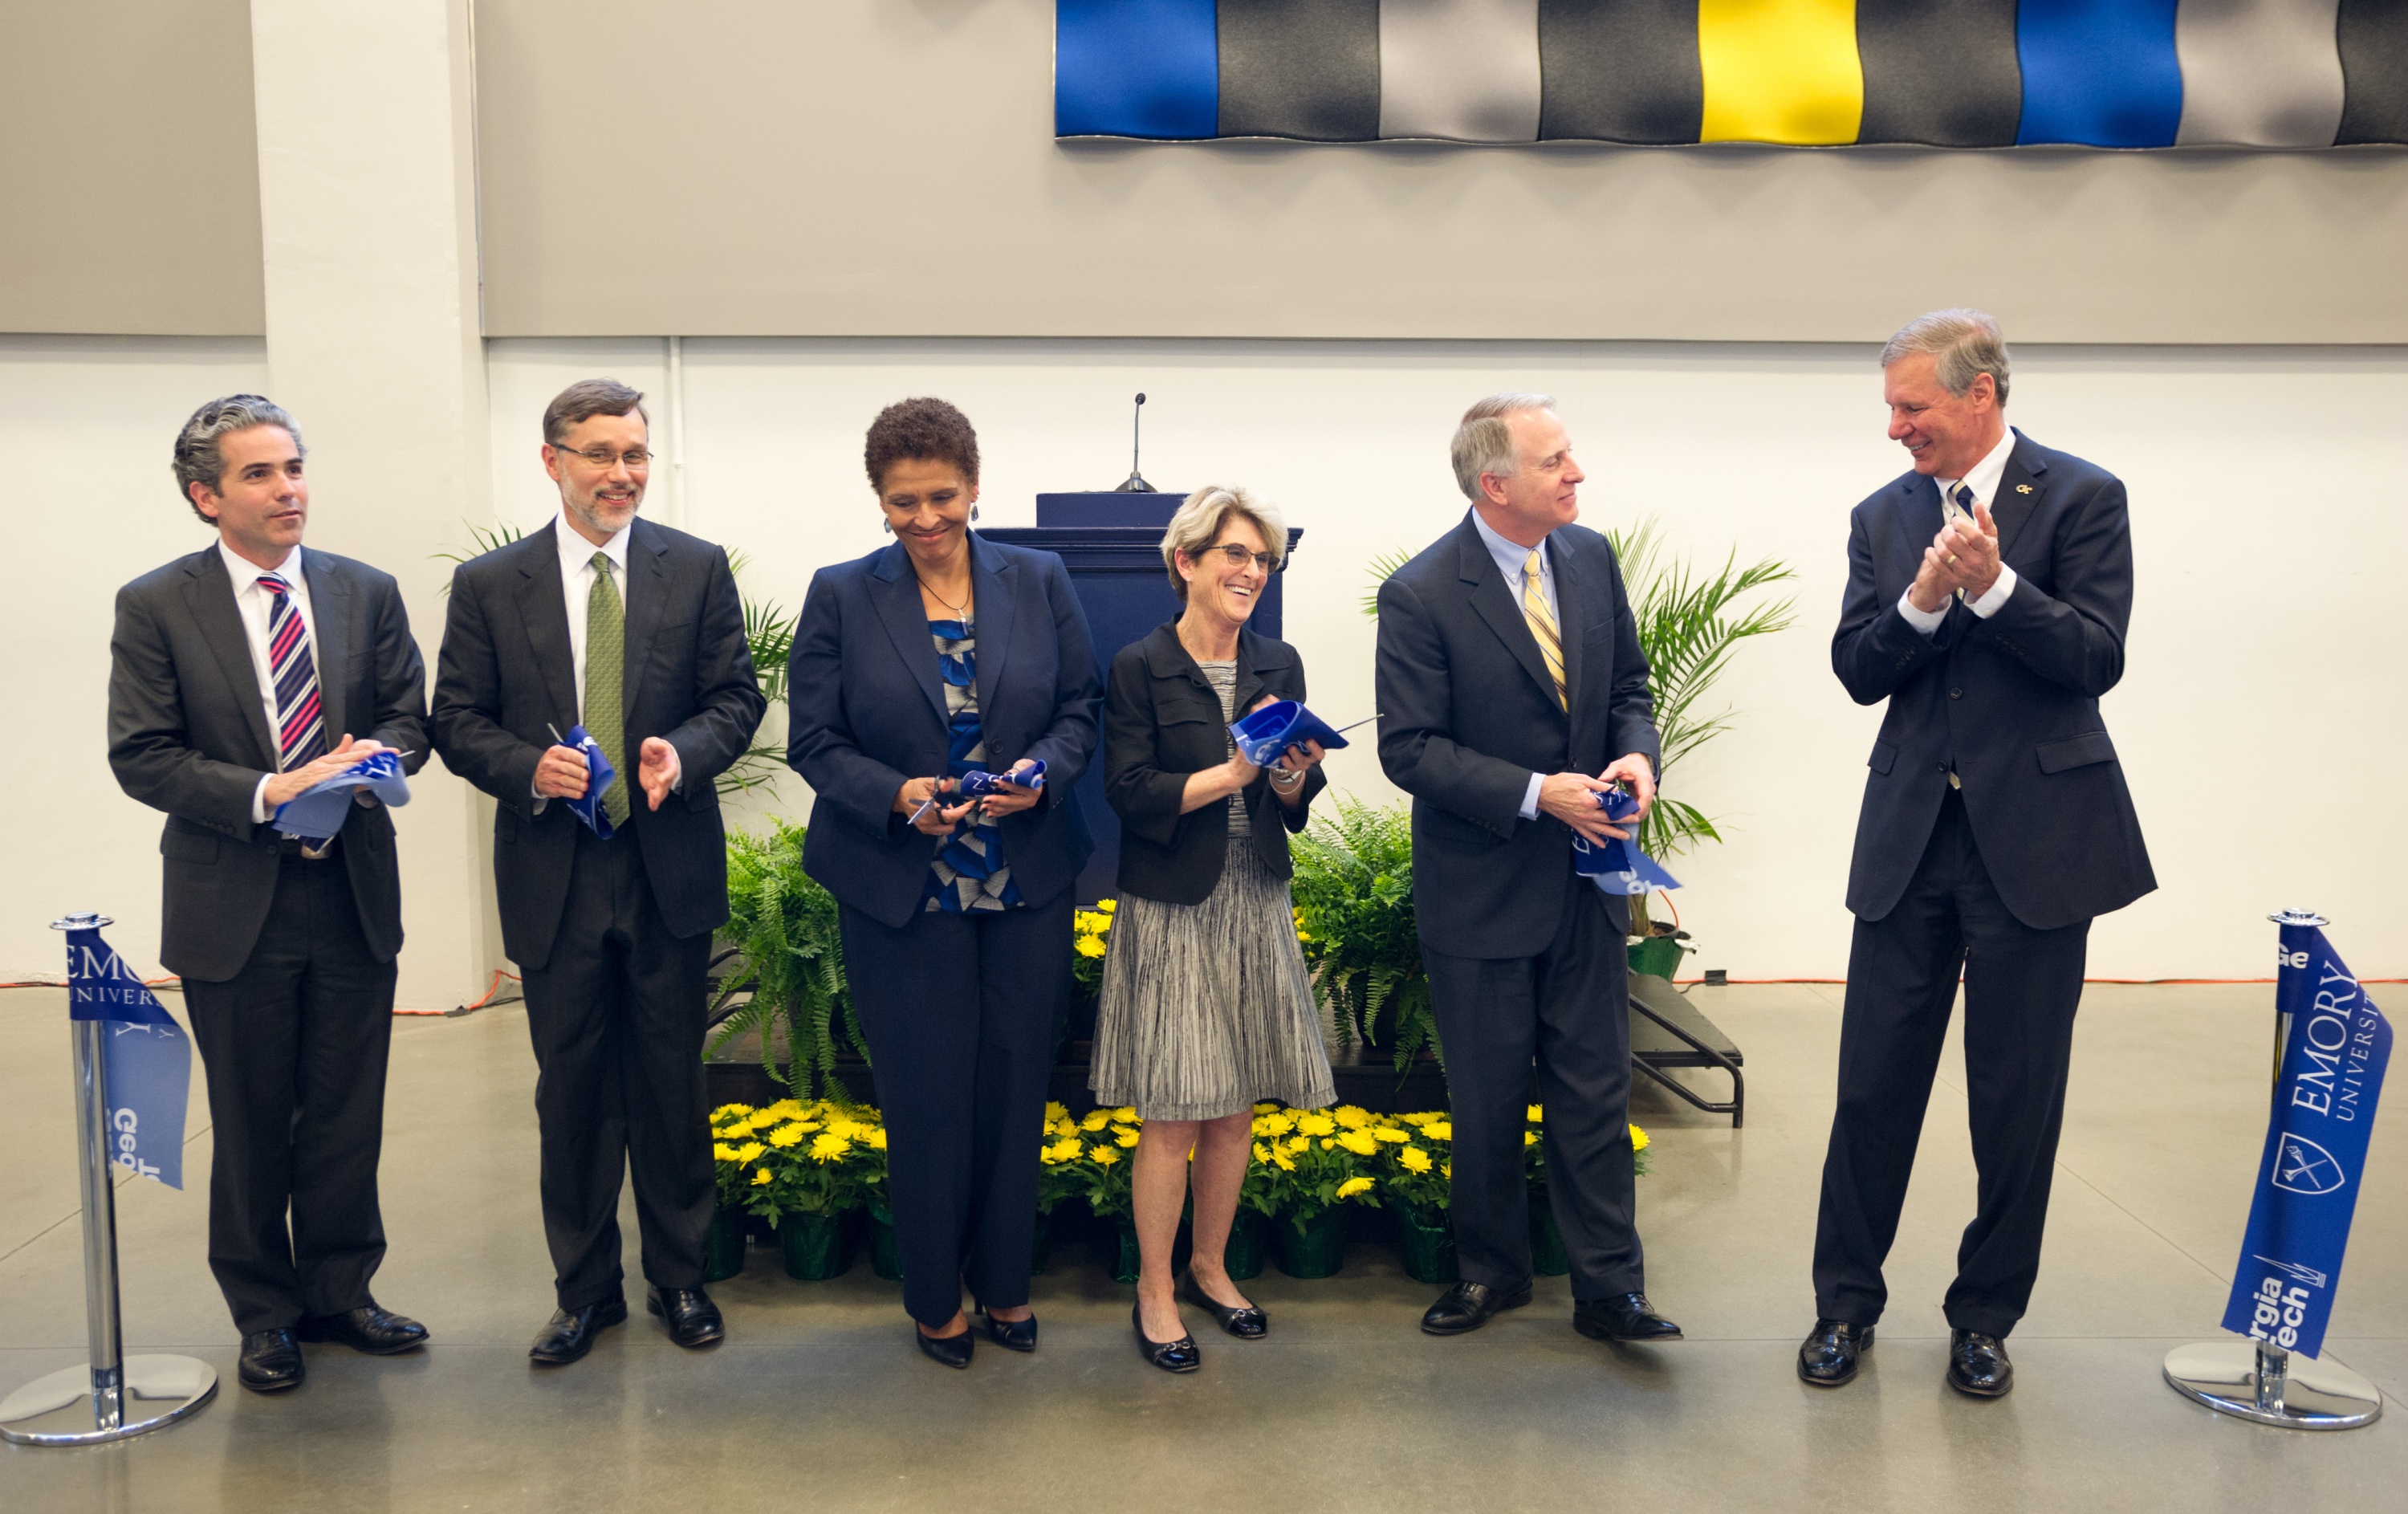 On hand to cut the ribbon for the new Library Service Center shared by Georgia Tech and Emory are, from left, Jack Tillman, President of EmTech; Rich Mendola, senior vice provost of Library Services &amp; Digital Scholarship at Emory; Yolanda Cooper, Emory University librarian; Catherine Murray-Rust, vice provost for learning excellence and dean of libraries at Georgia Tech; Emory President James Wagner; and Georgia Tech President G.P. "Bud" Peterson.